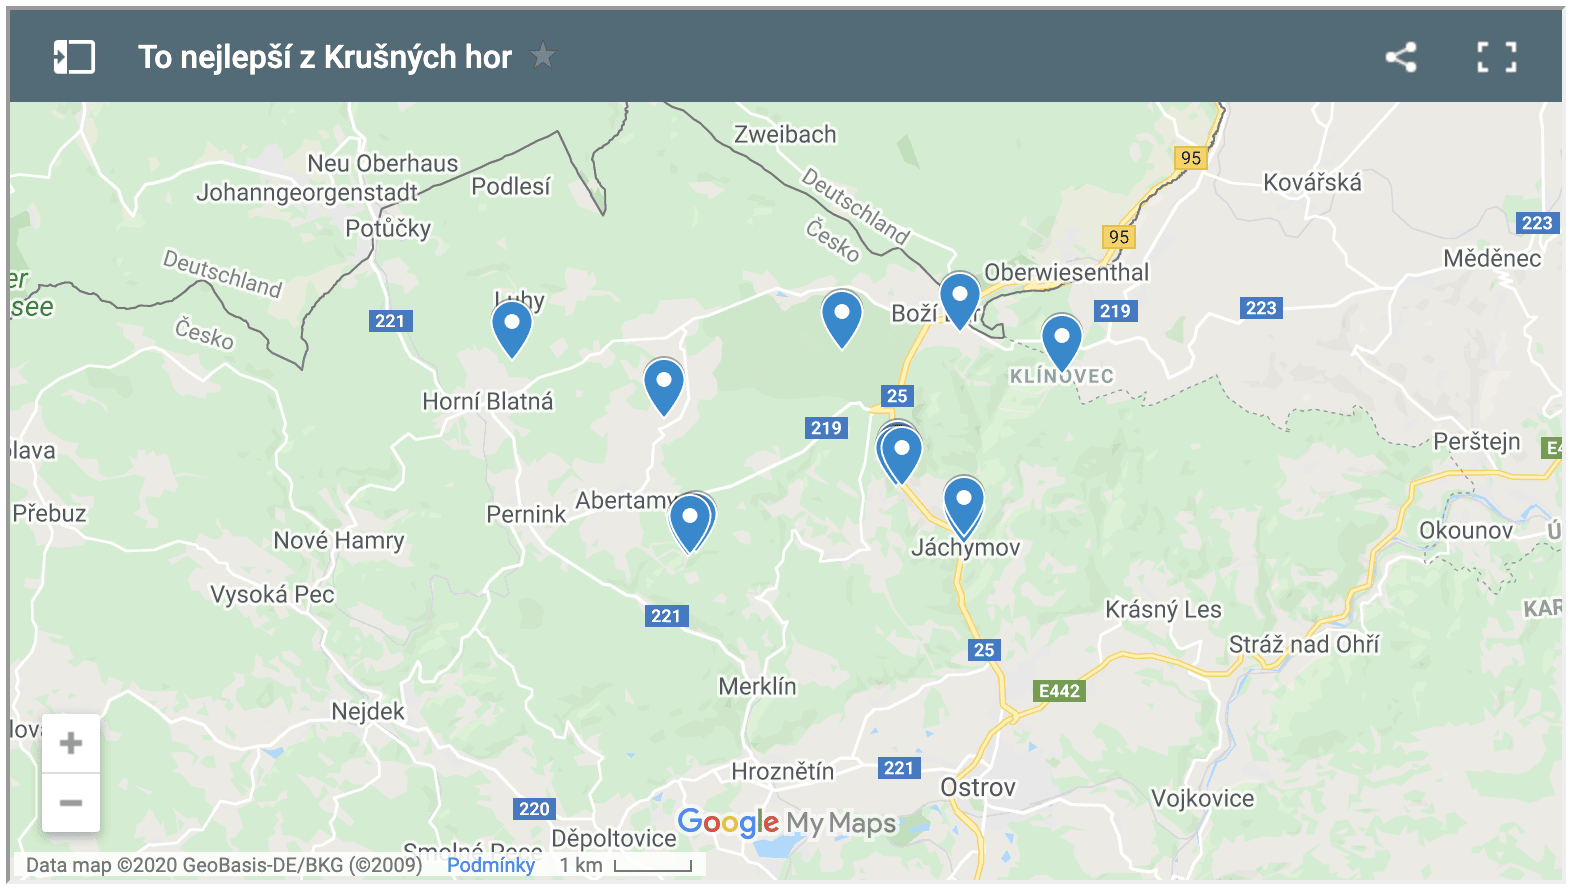 Map of interesting places in the Ore Mountains